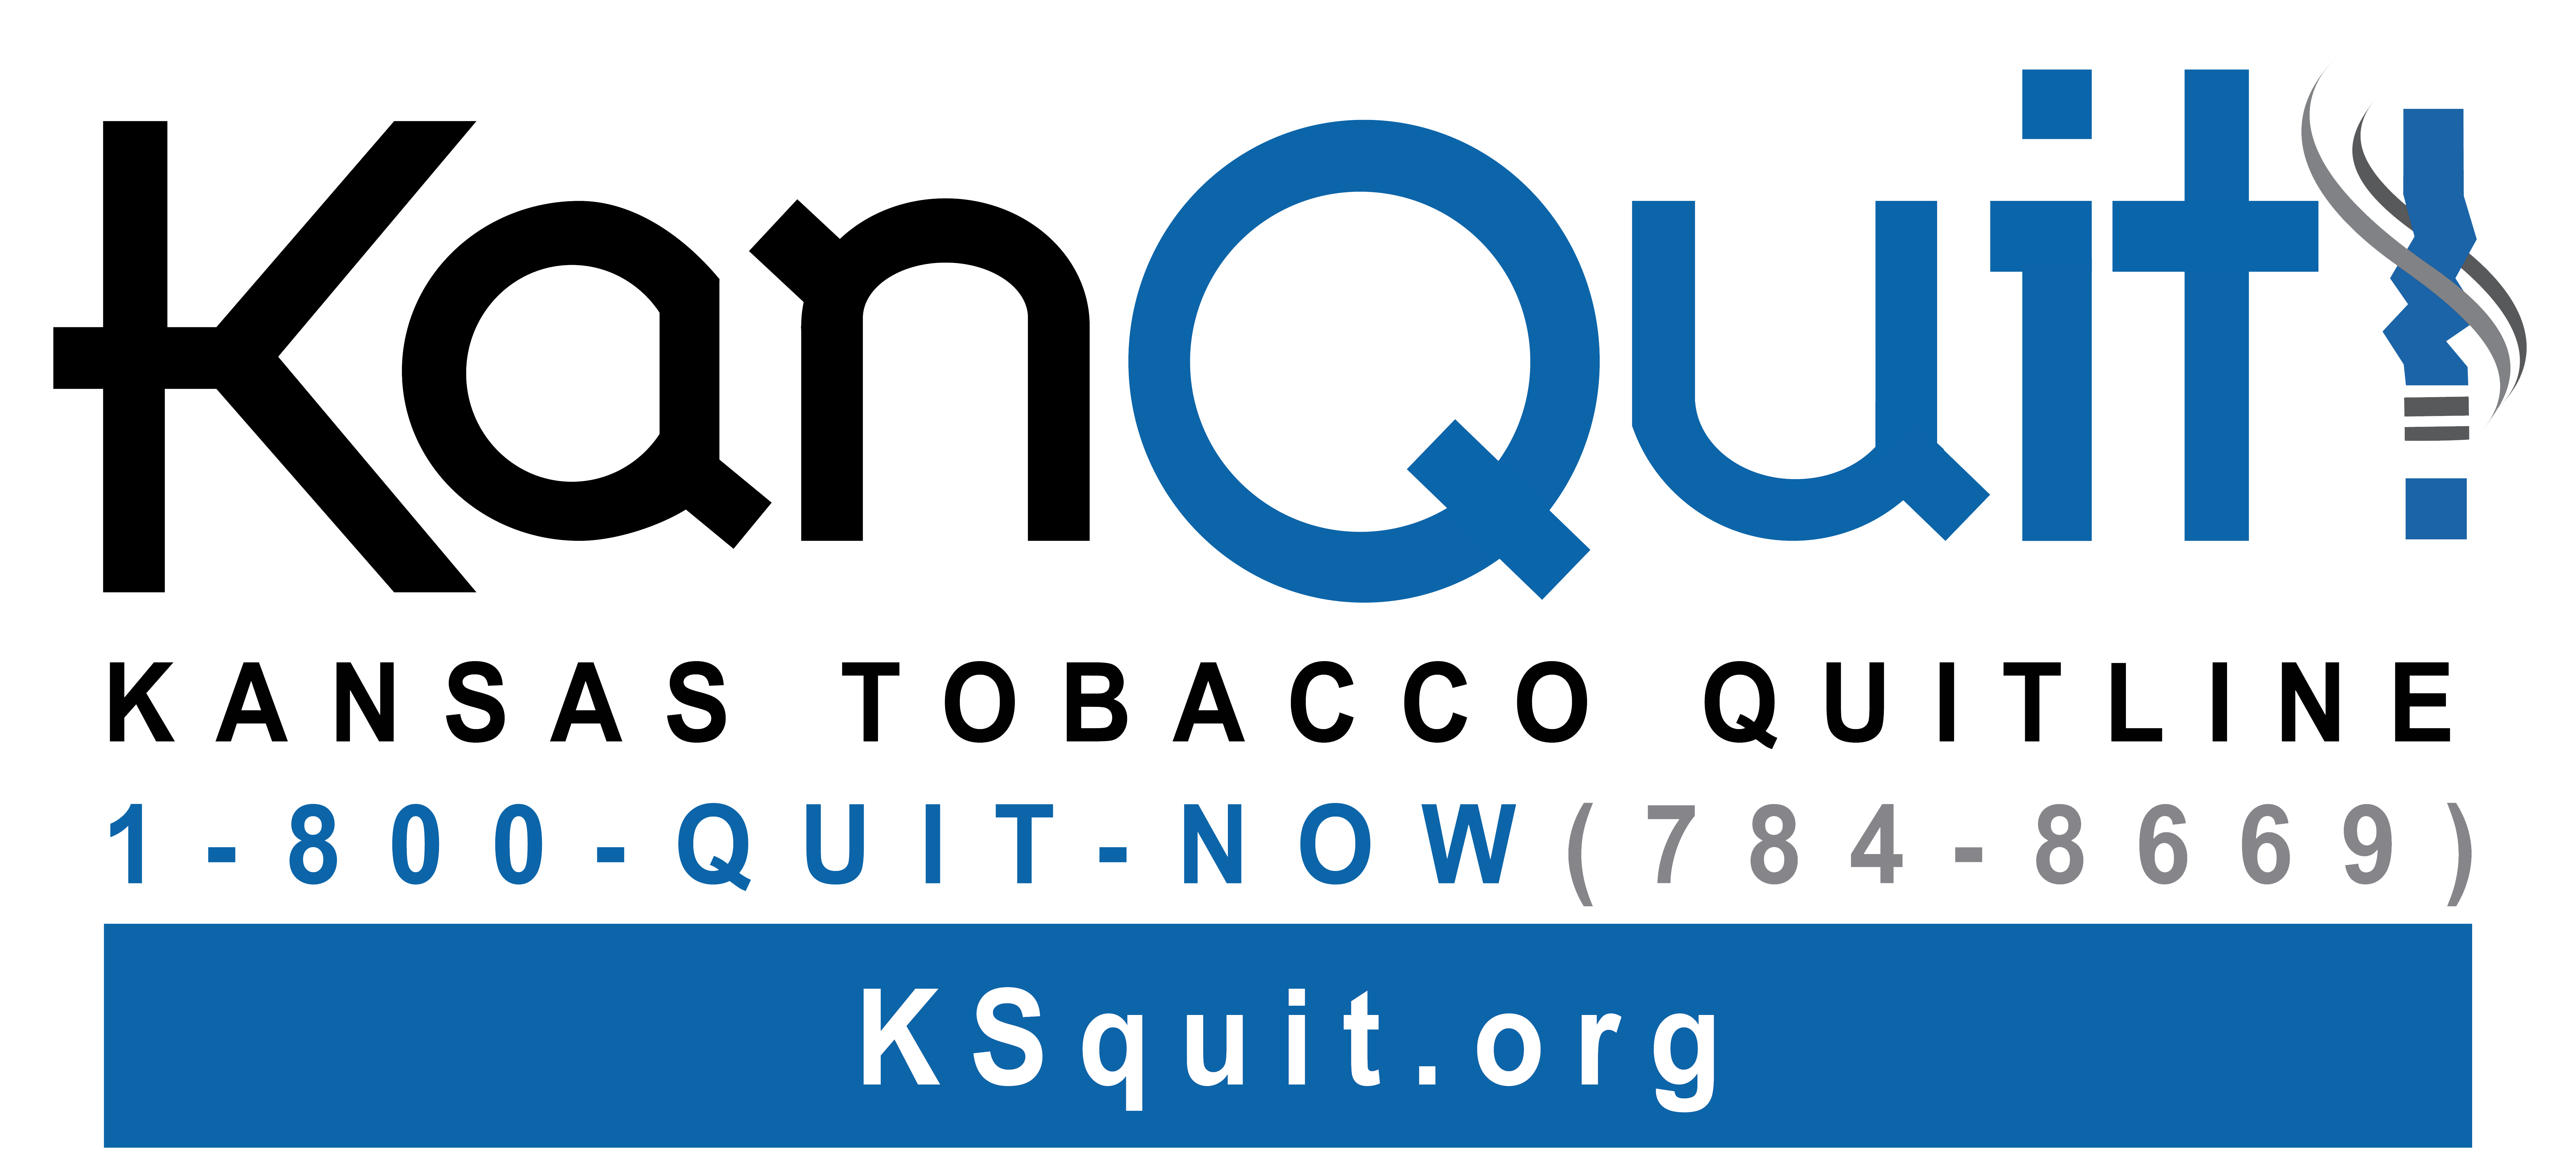 KanQuit logo and phone 800-784-8669